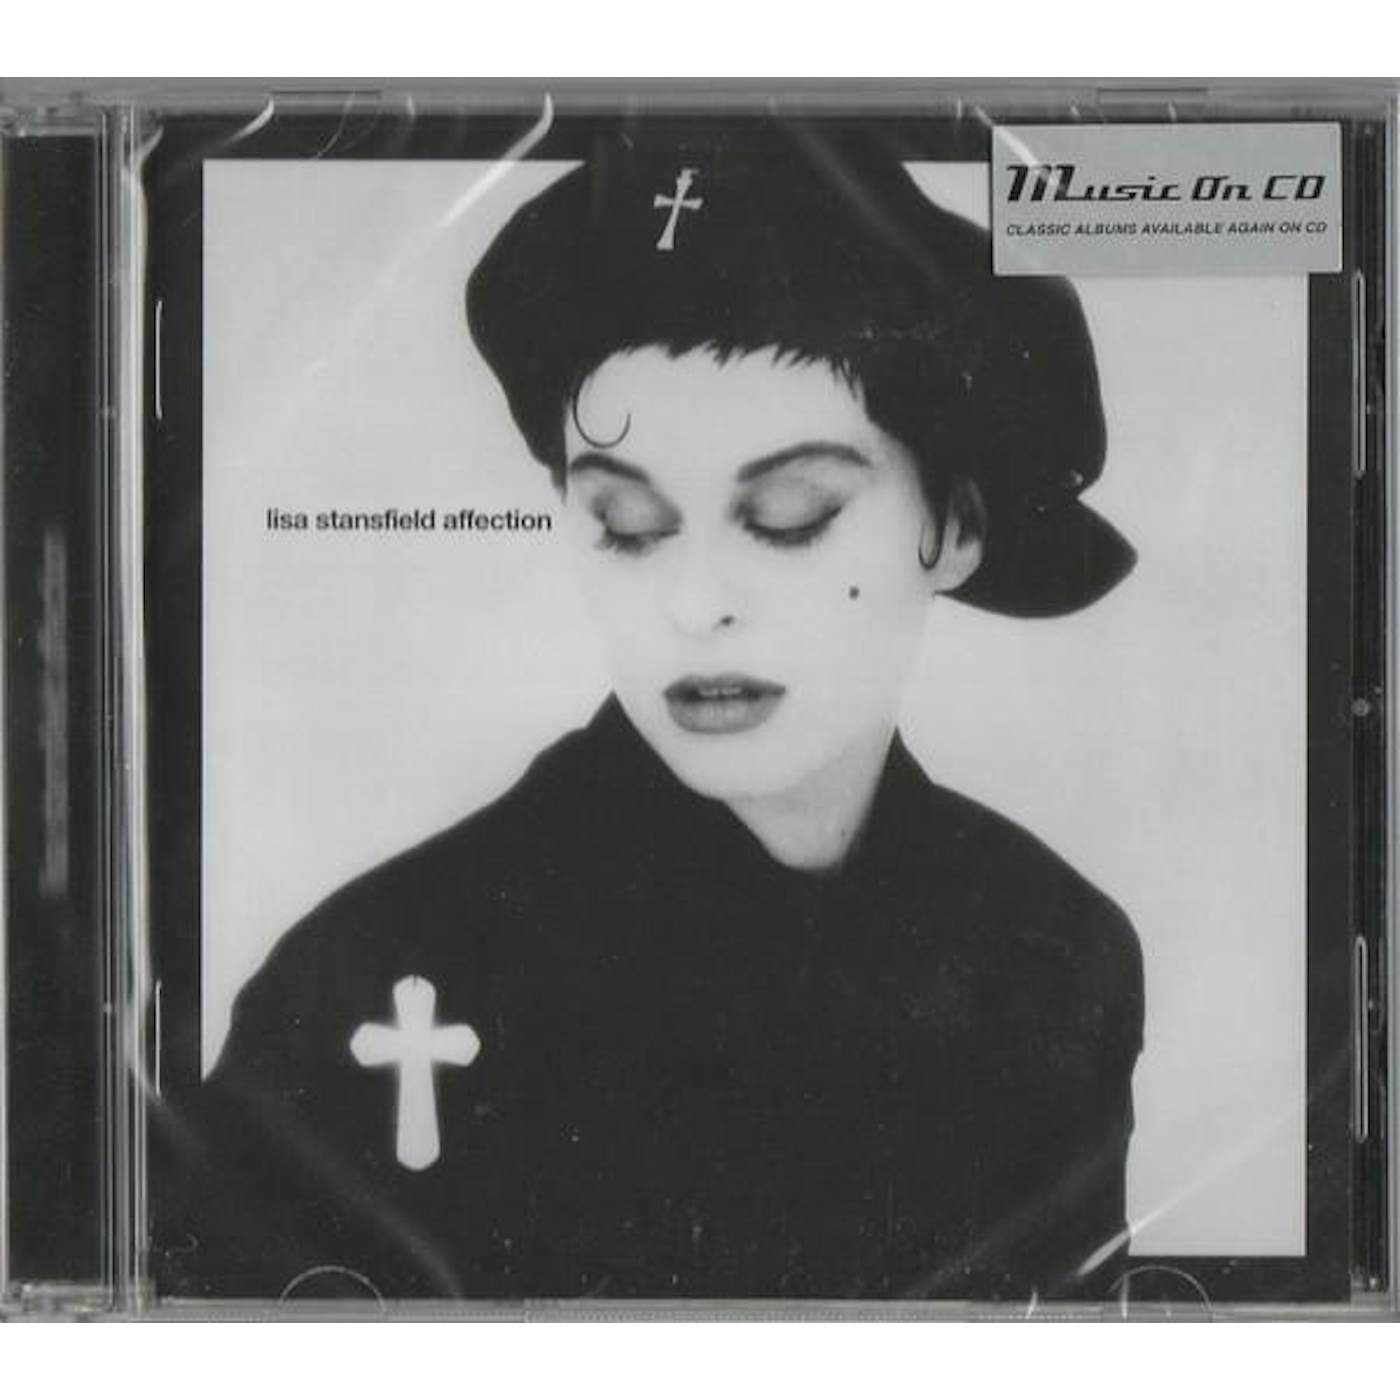 Lisa Stansfield AFFECTION (IMPORT) CD